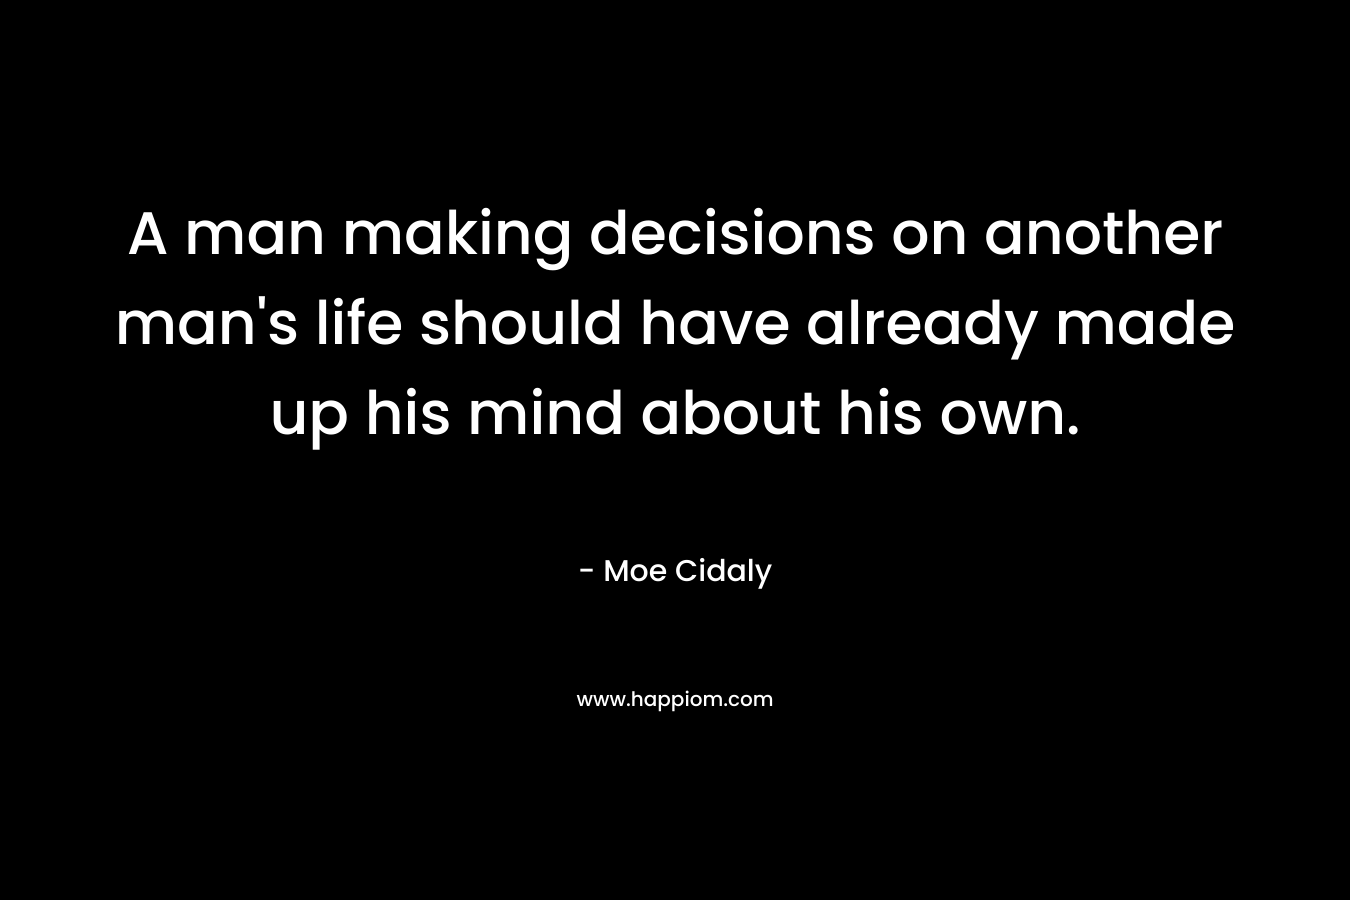 A man making decisions on another man's life should have already made up his mind about his own.